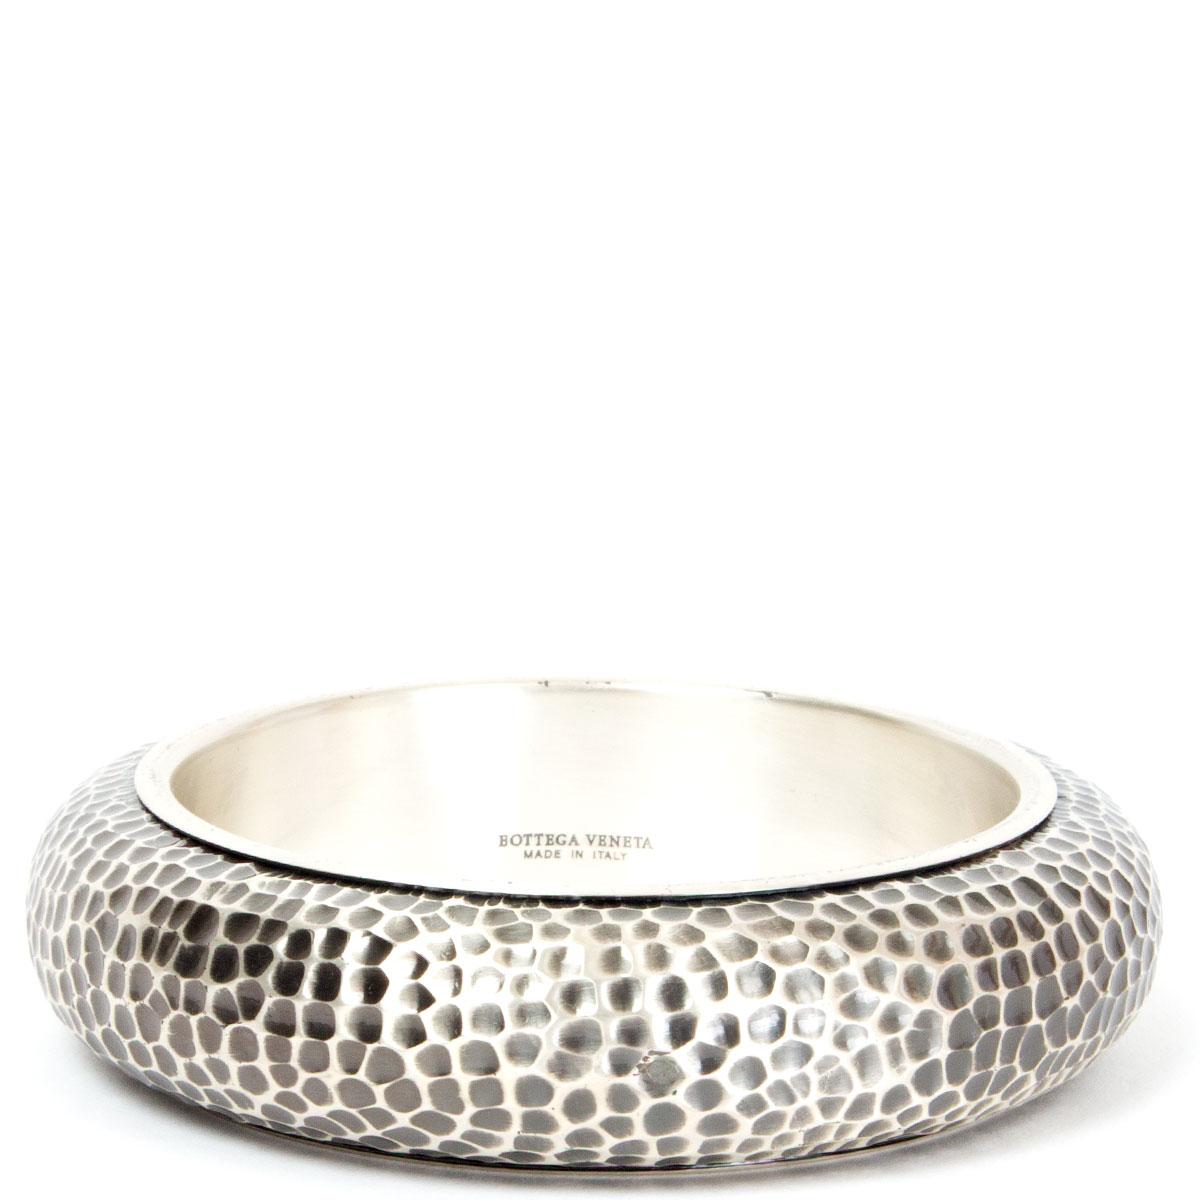 authentic Bottega Veneta oxidized hammered bangle bracelet in sterling silver. Has been worn and are in excellent condition. Comes with box and dust bag. 

Tag Size M
Circumference 20.5cm (8in)

